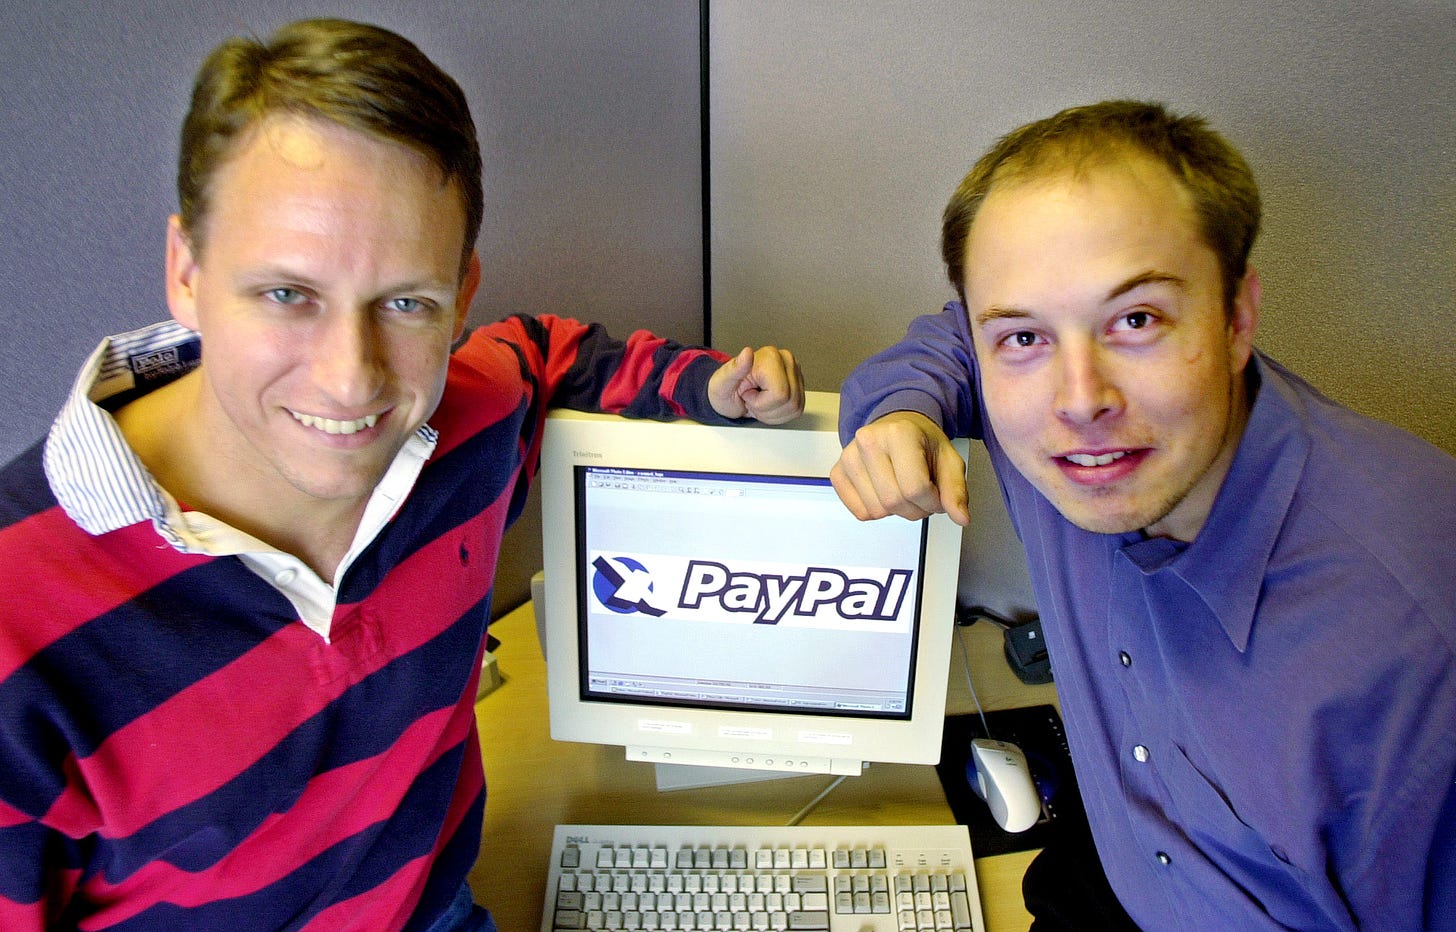 Elon Musk tried to rebrand PayPal as X.com. Some thought it was porn and he  was ousted in a coup. - The Washington Post